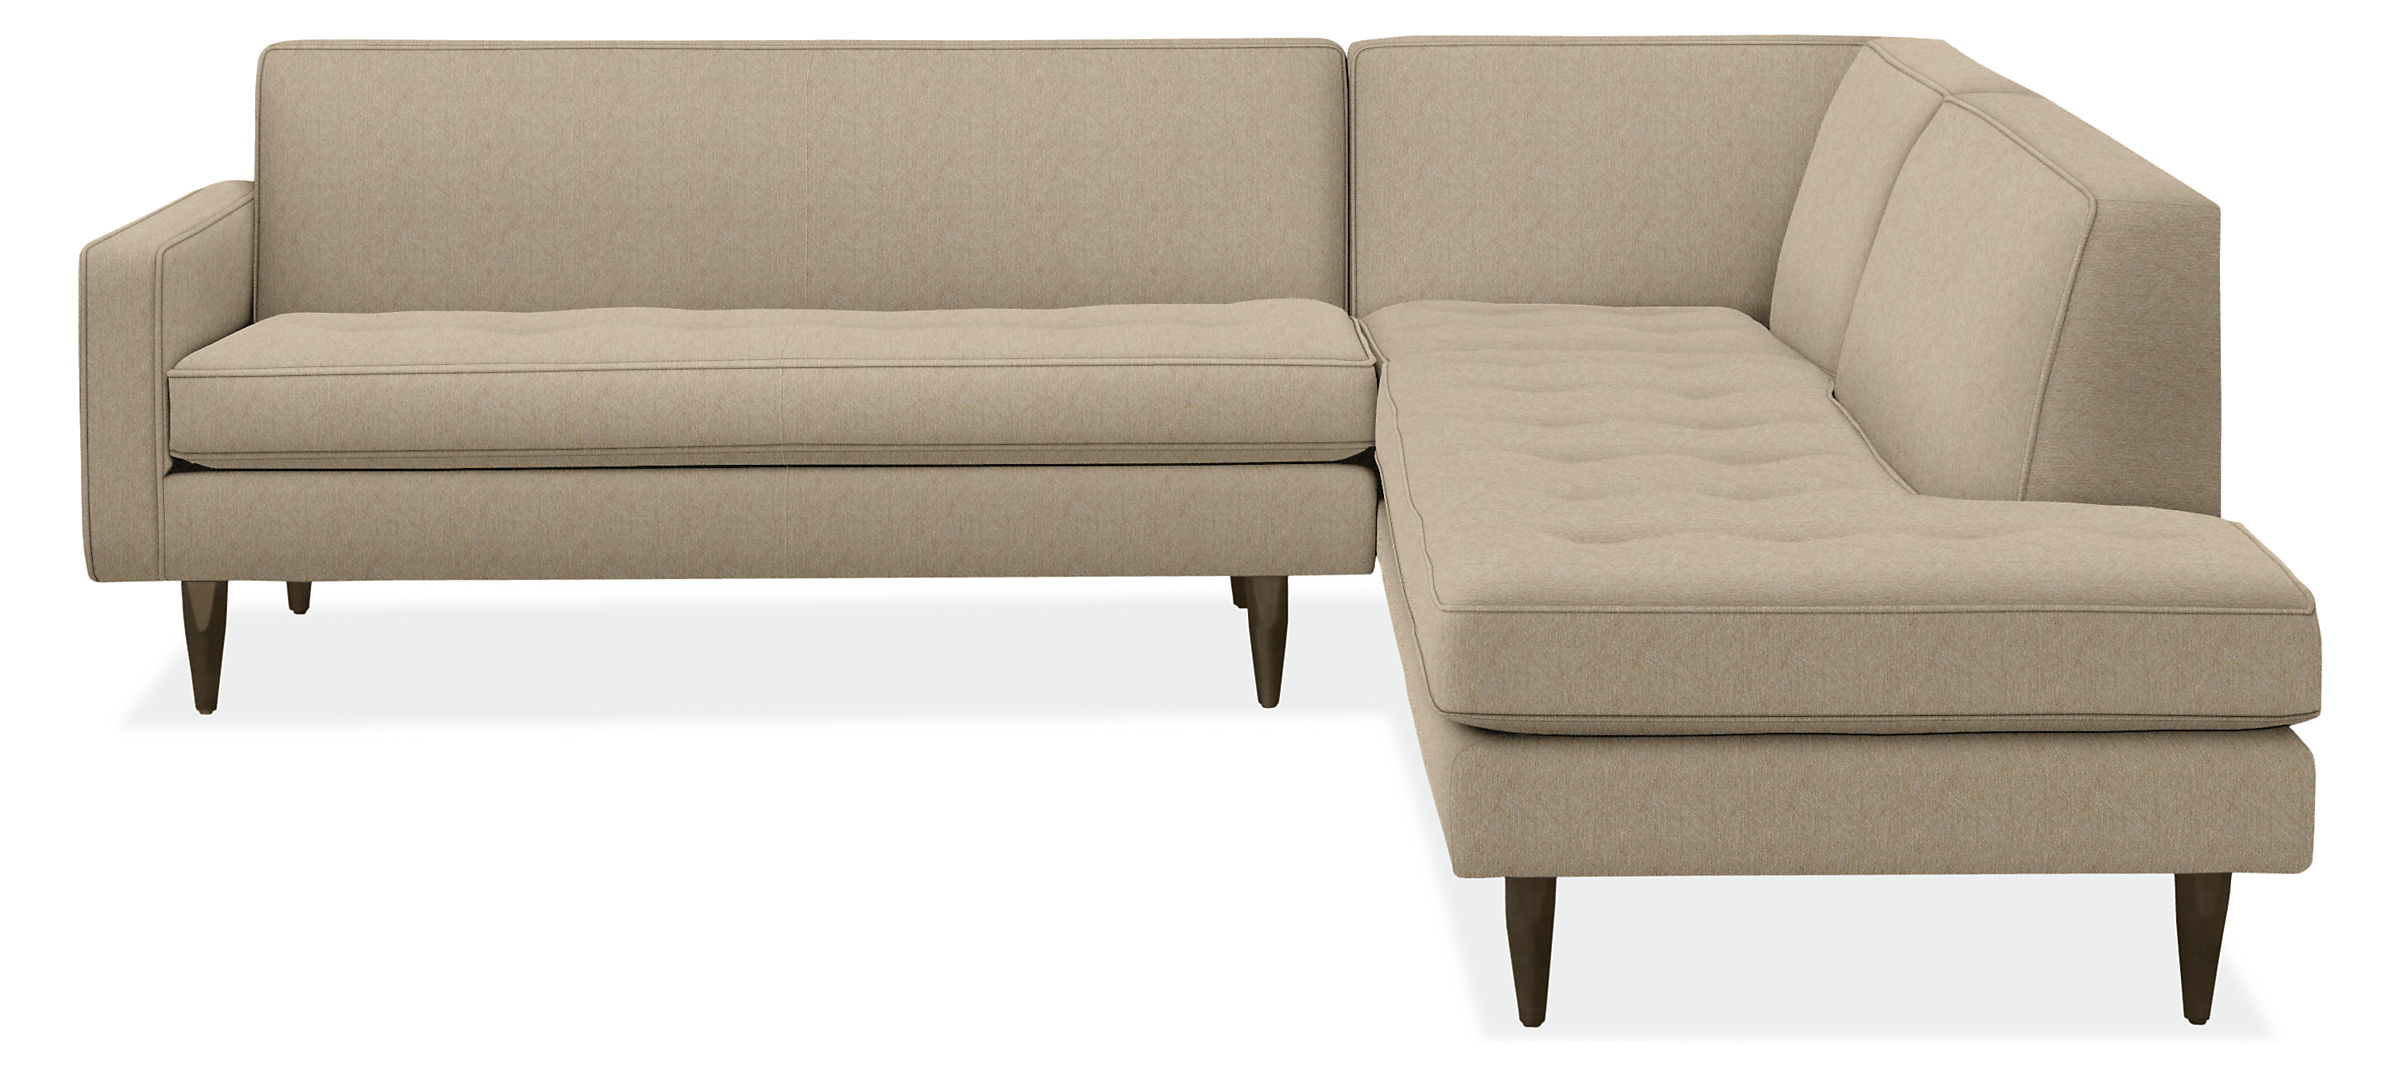 Reese 98x97" Three-Piece Sectional with Left-Back Sofa